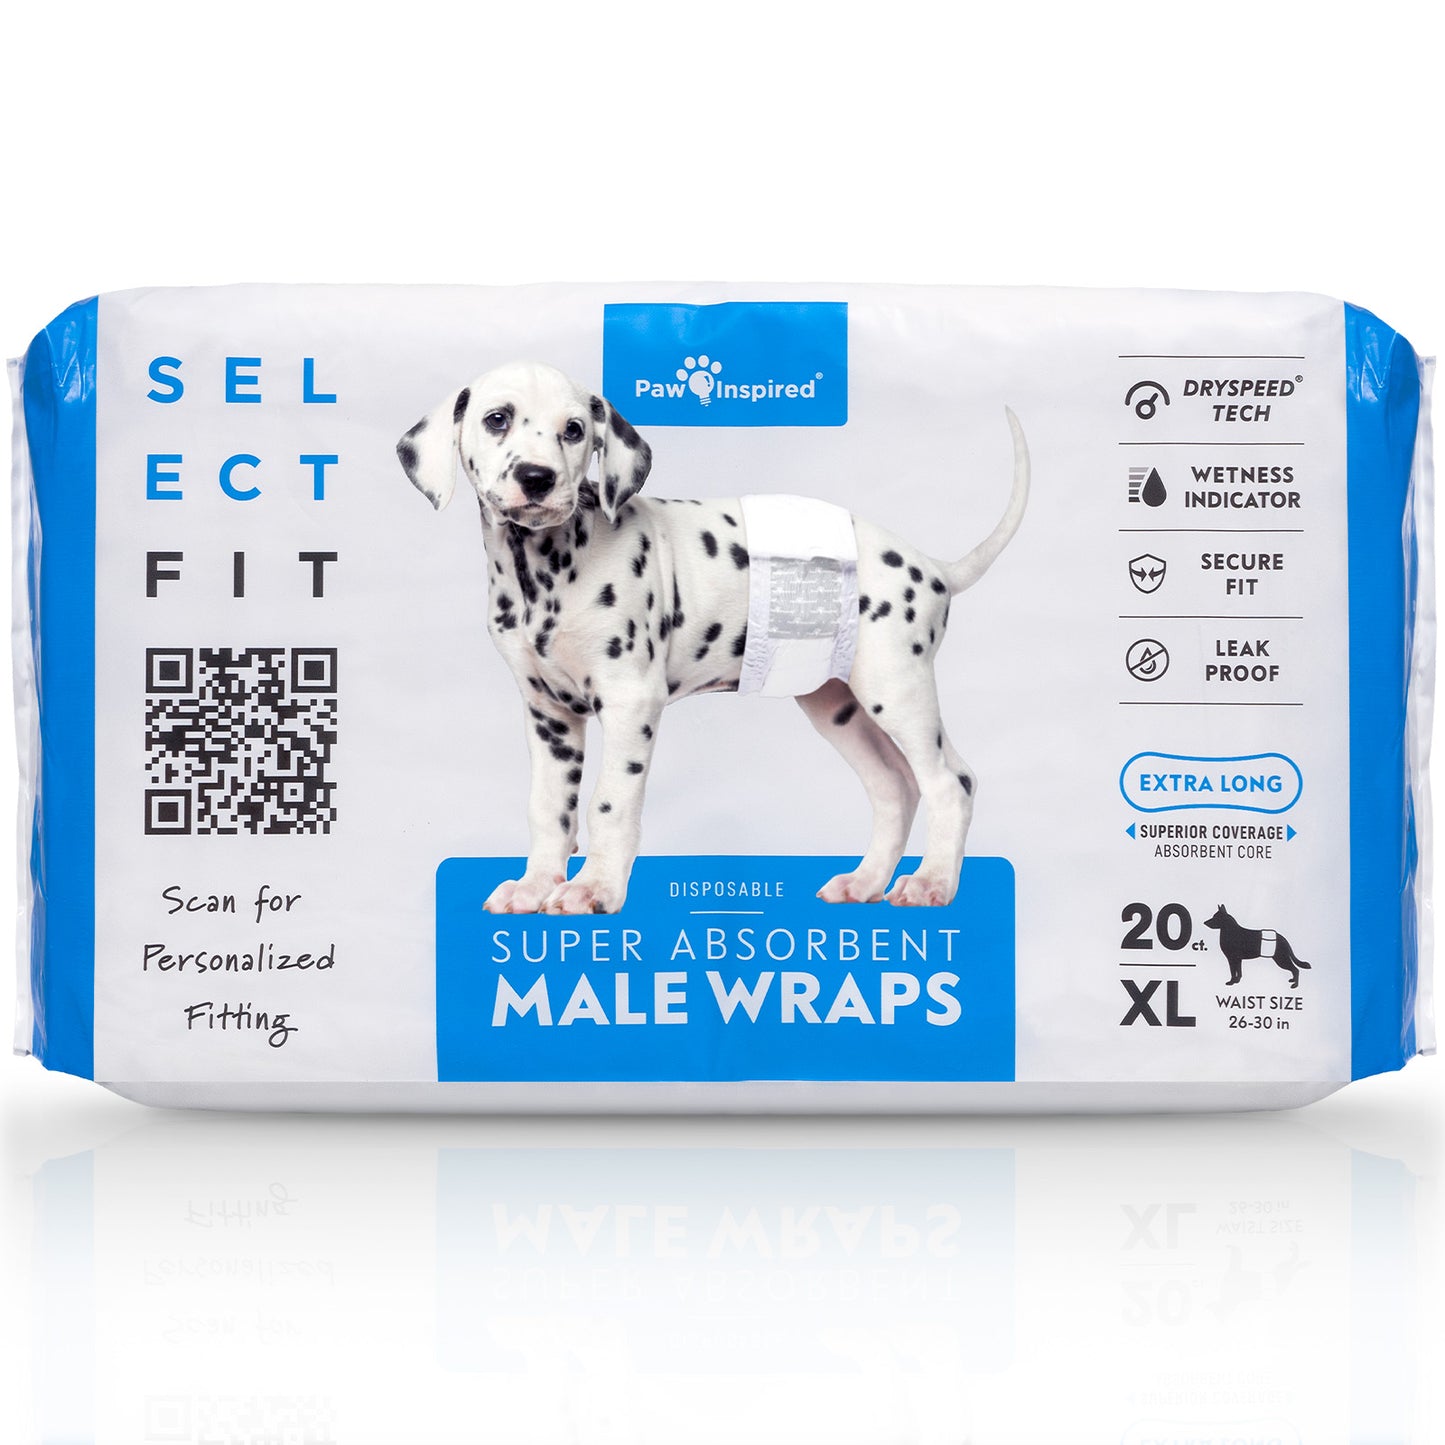 Select Fit Disposable Male Wraps with Extended Absorbent Core and Wetness Indicator